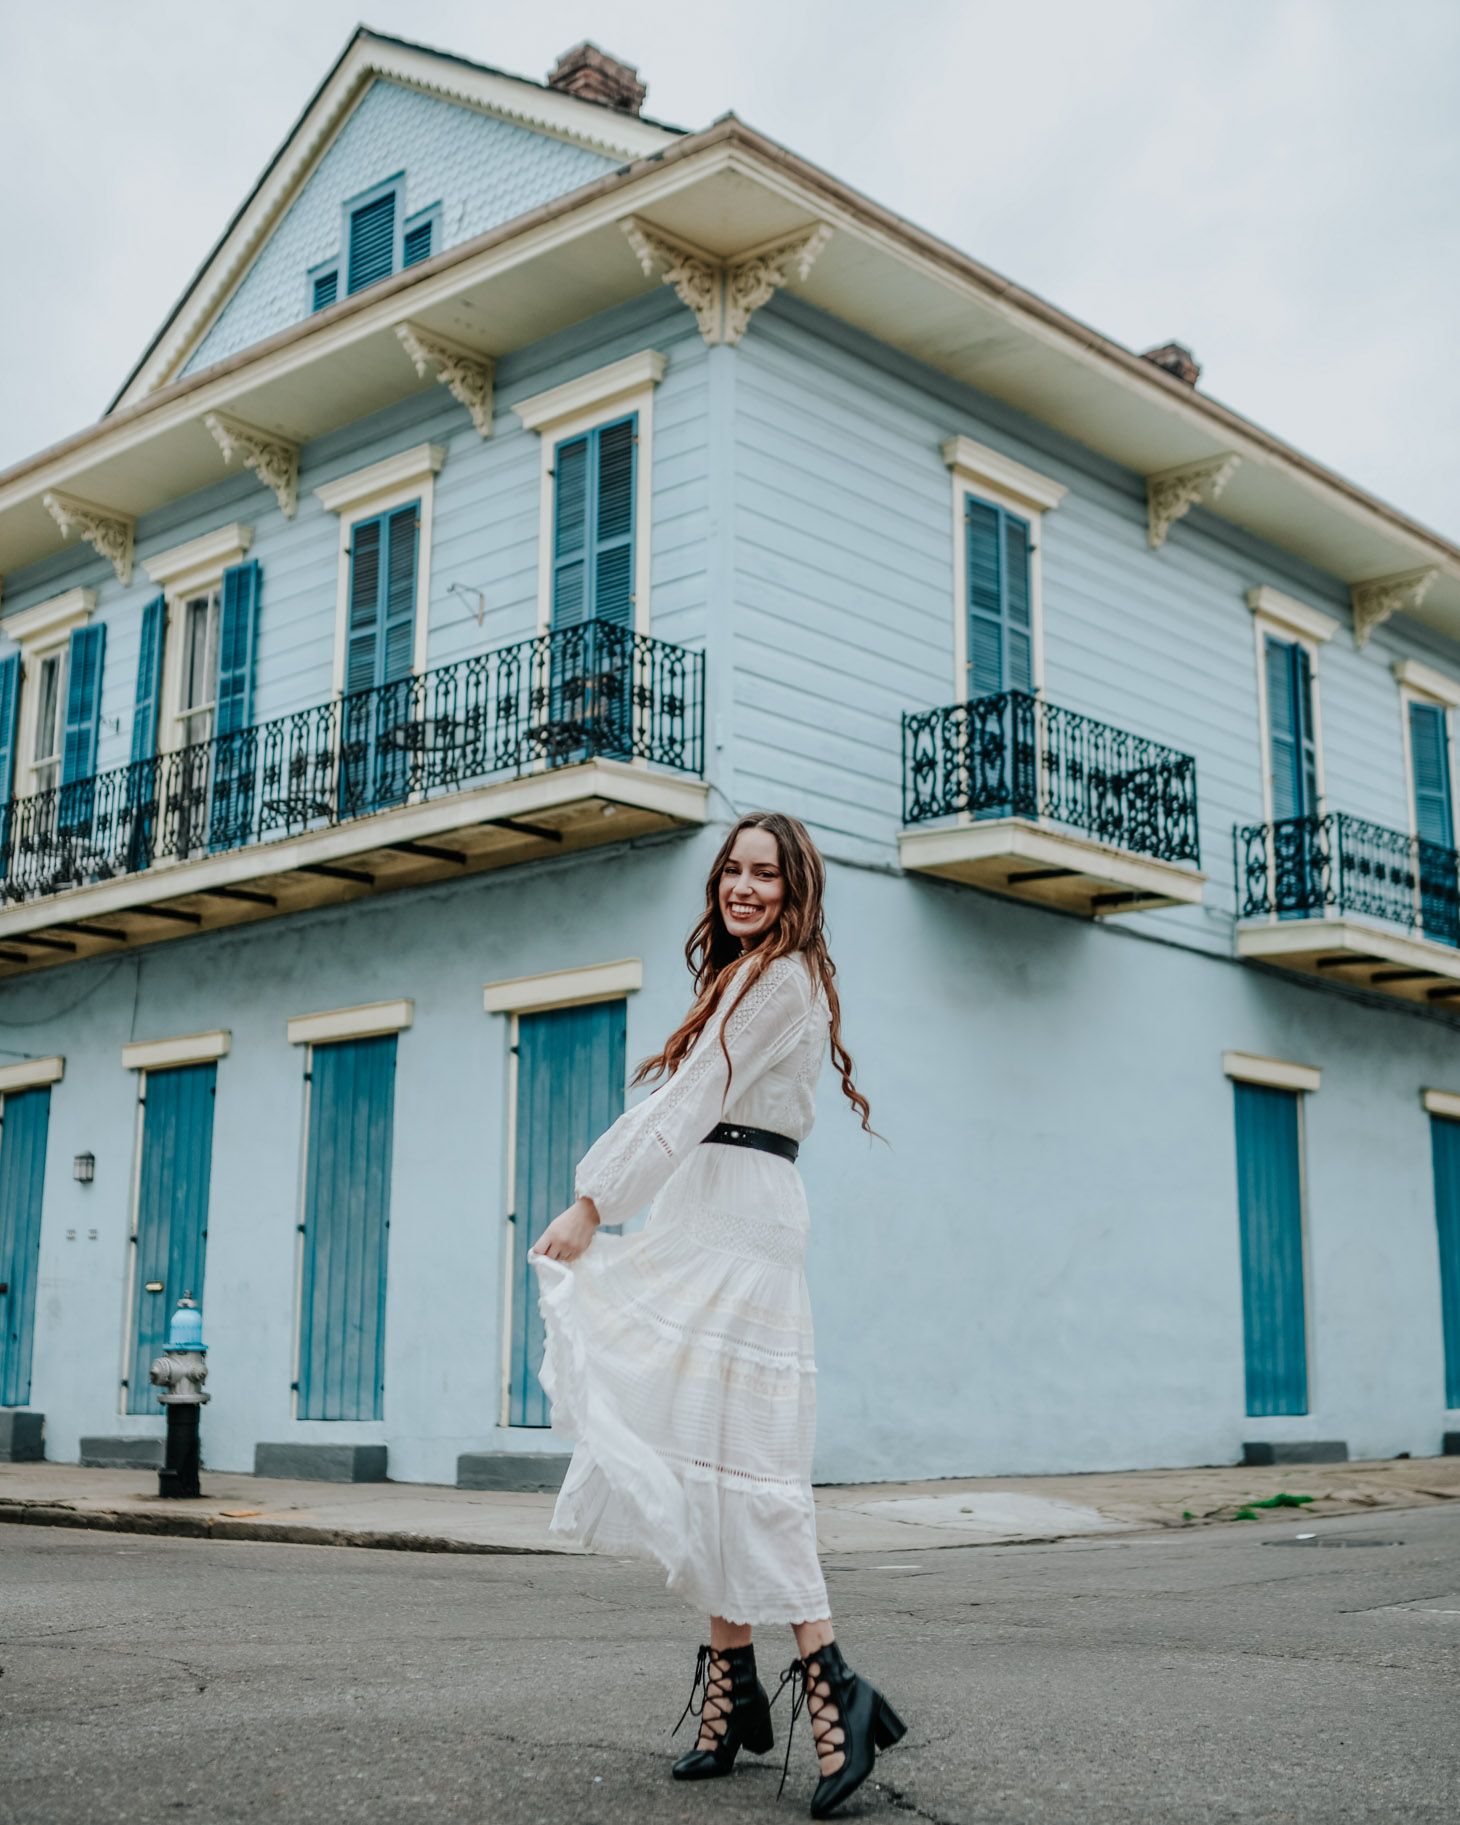 The perfect Boho White Dress for Spring styled by top US fashion blog, Lone Star Looking Glass: image of a woman wearing a Hanging Rock Gown boho white dress available at Shopbop, Free People studded belt, trench booties and an Anthropologie mini tote